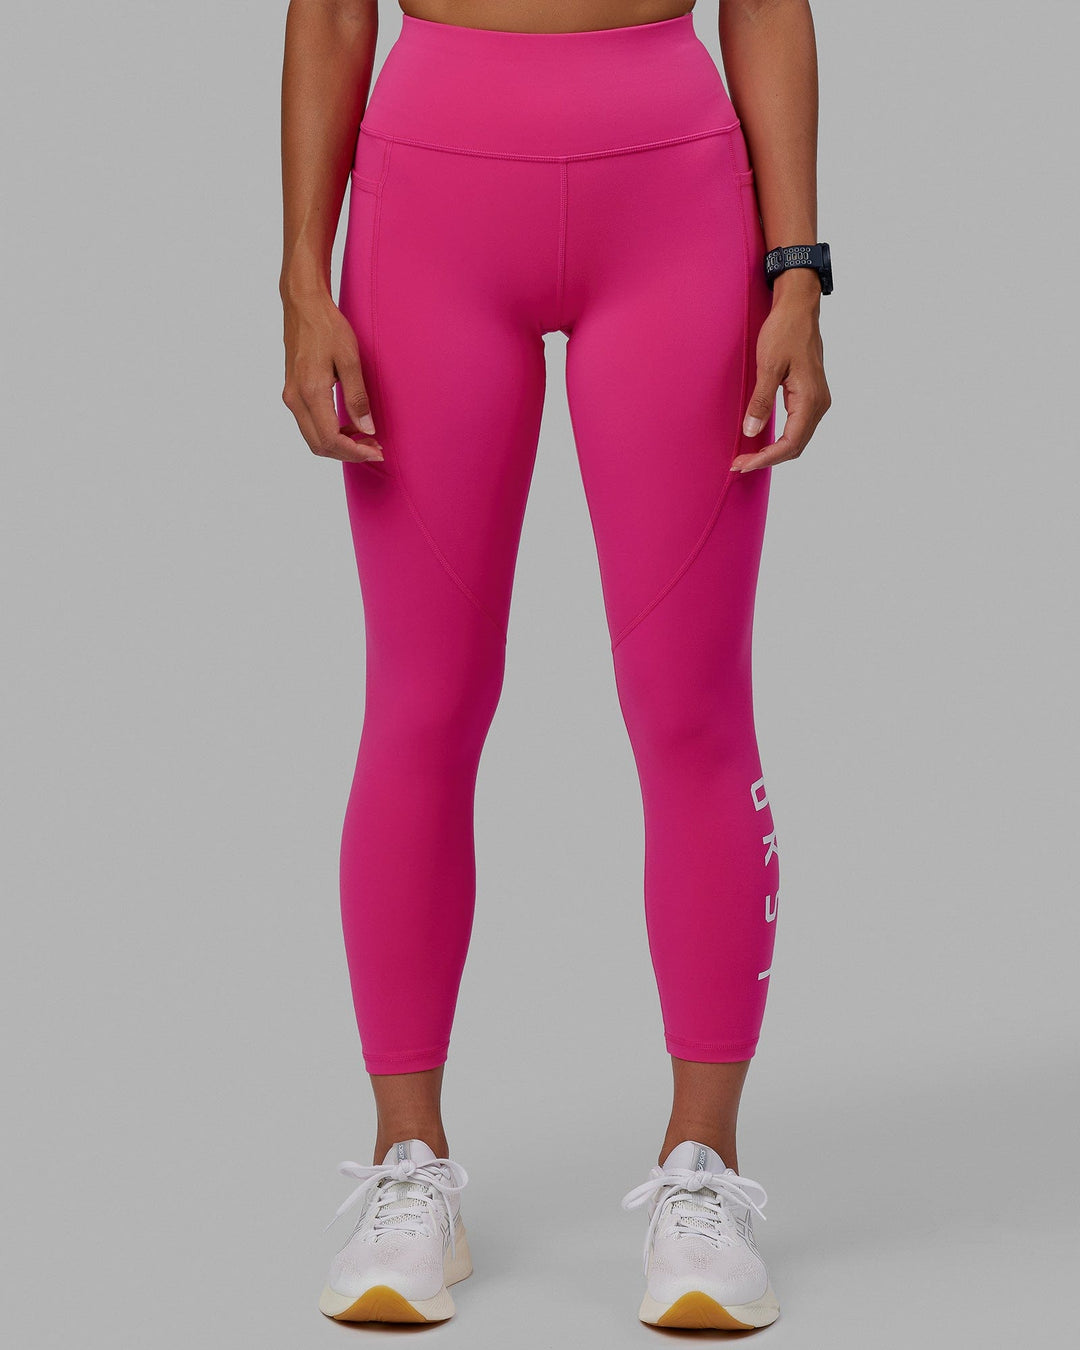 Woman wearing Rep 7/8 Length Tights - Ultra Pink-White